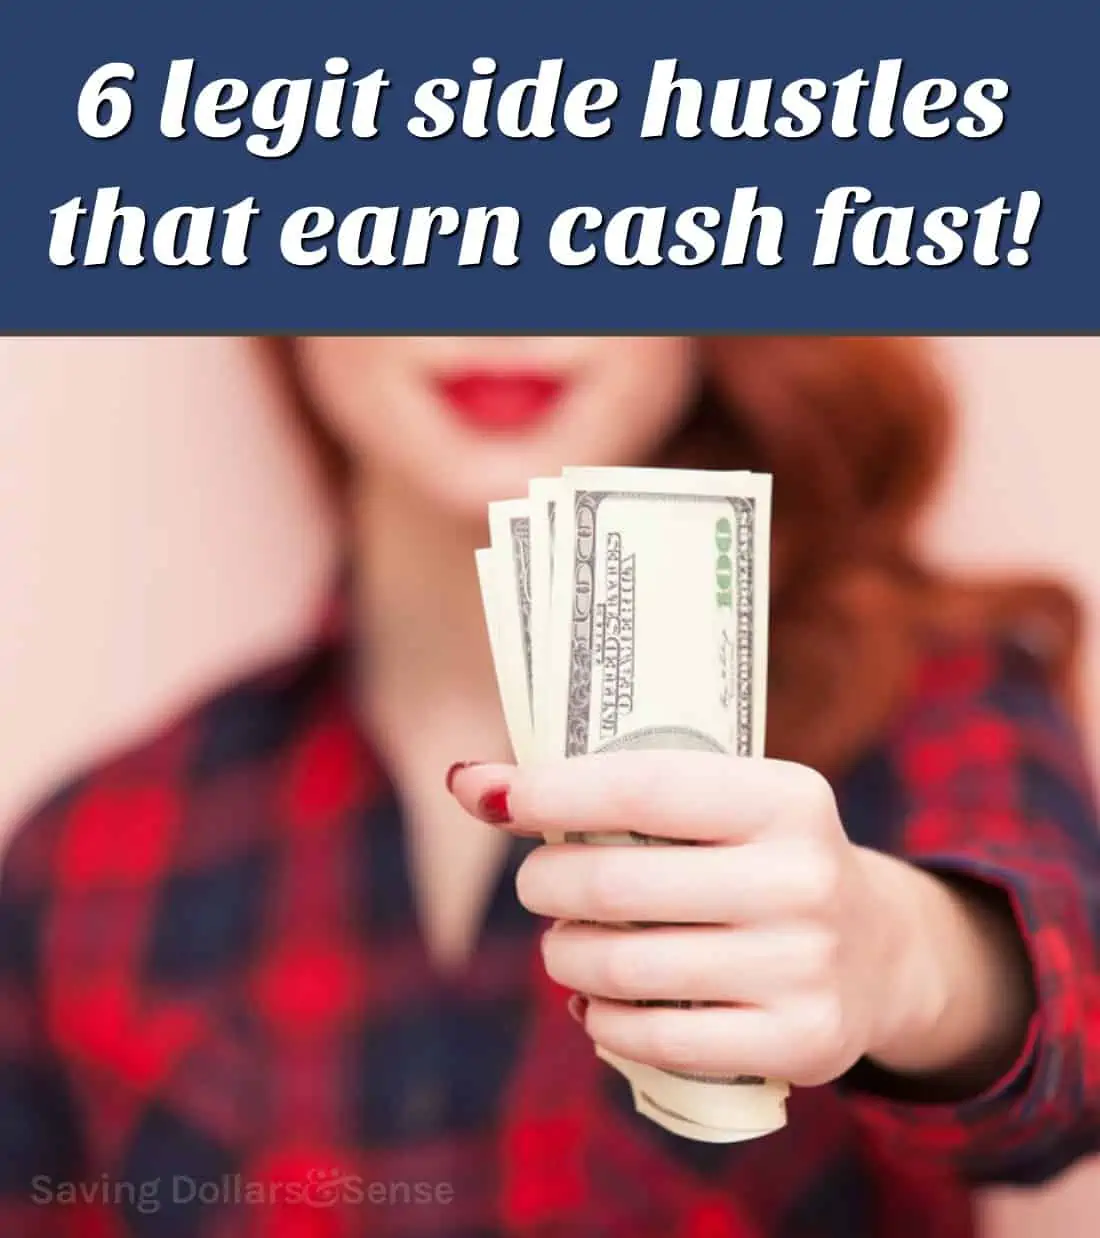 legit side hustles that can help you earn an income.